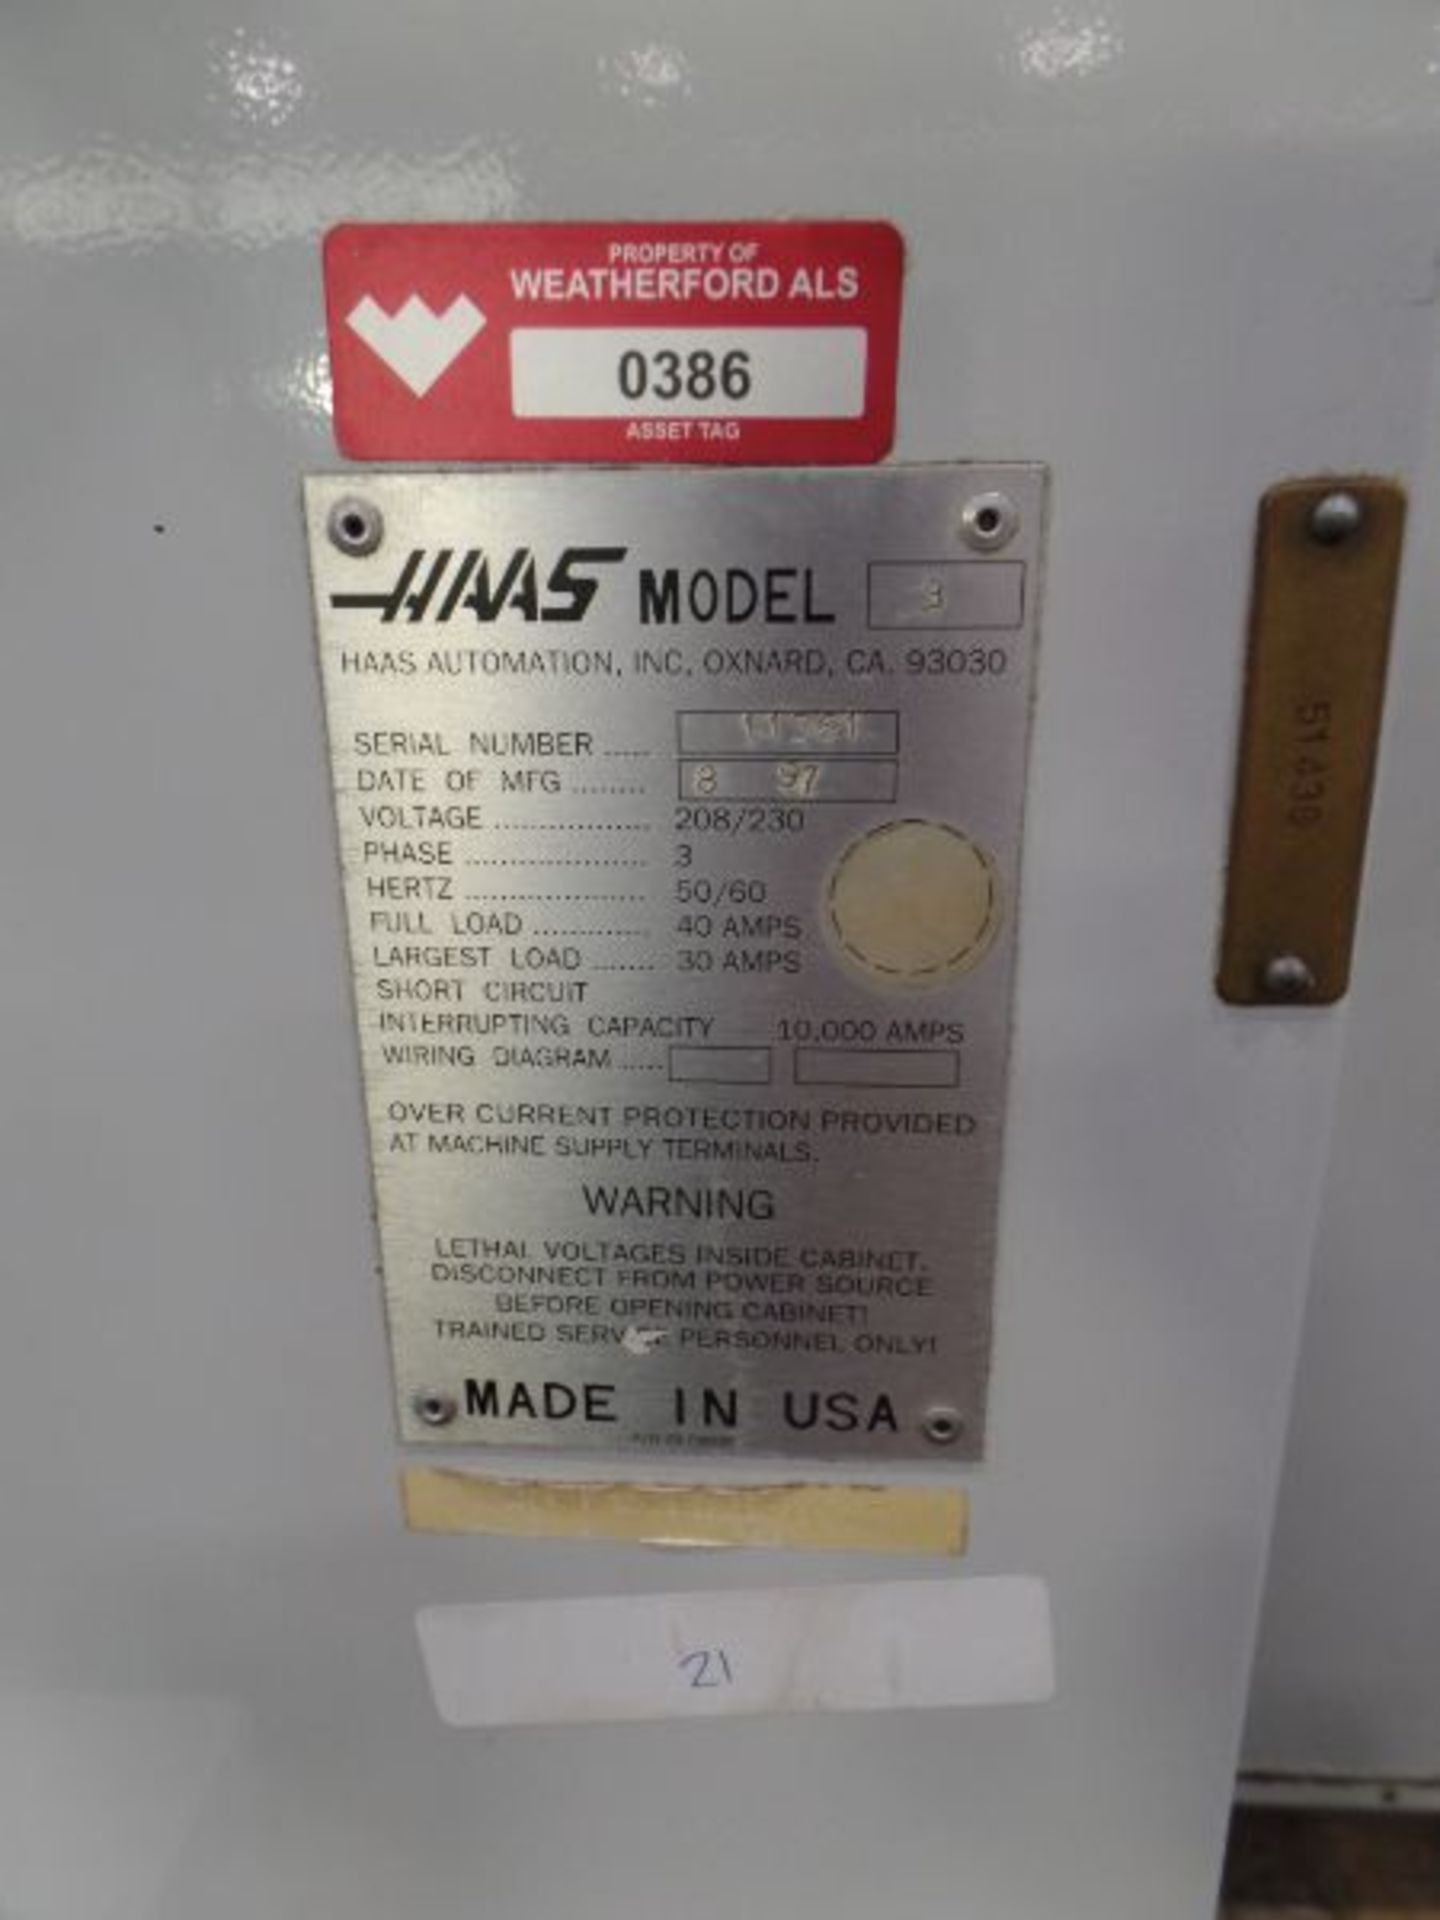 Haas VF-3, Retro’d control, 40”x 20”x 20” Travels, CT40, New 1997 *Indexer Sold Separate* - Image 9 of 9